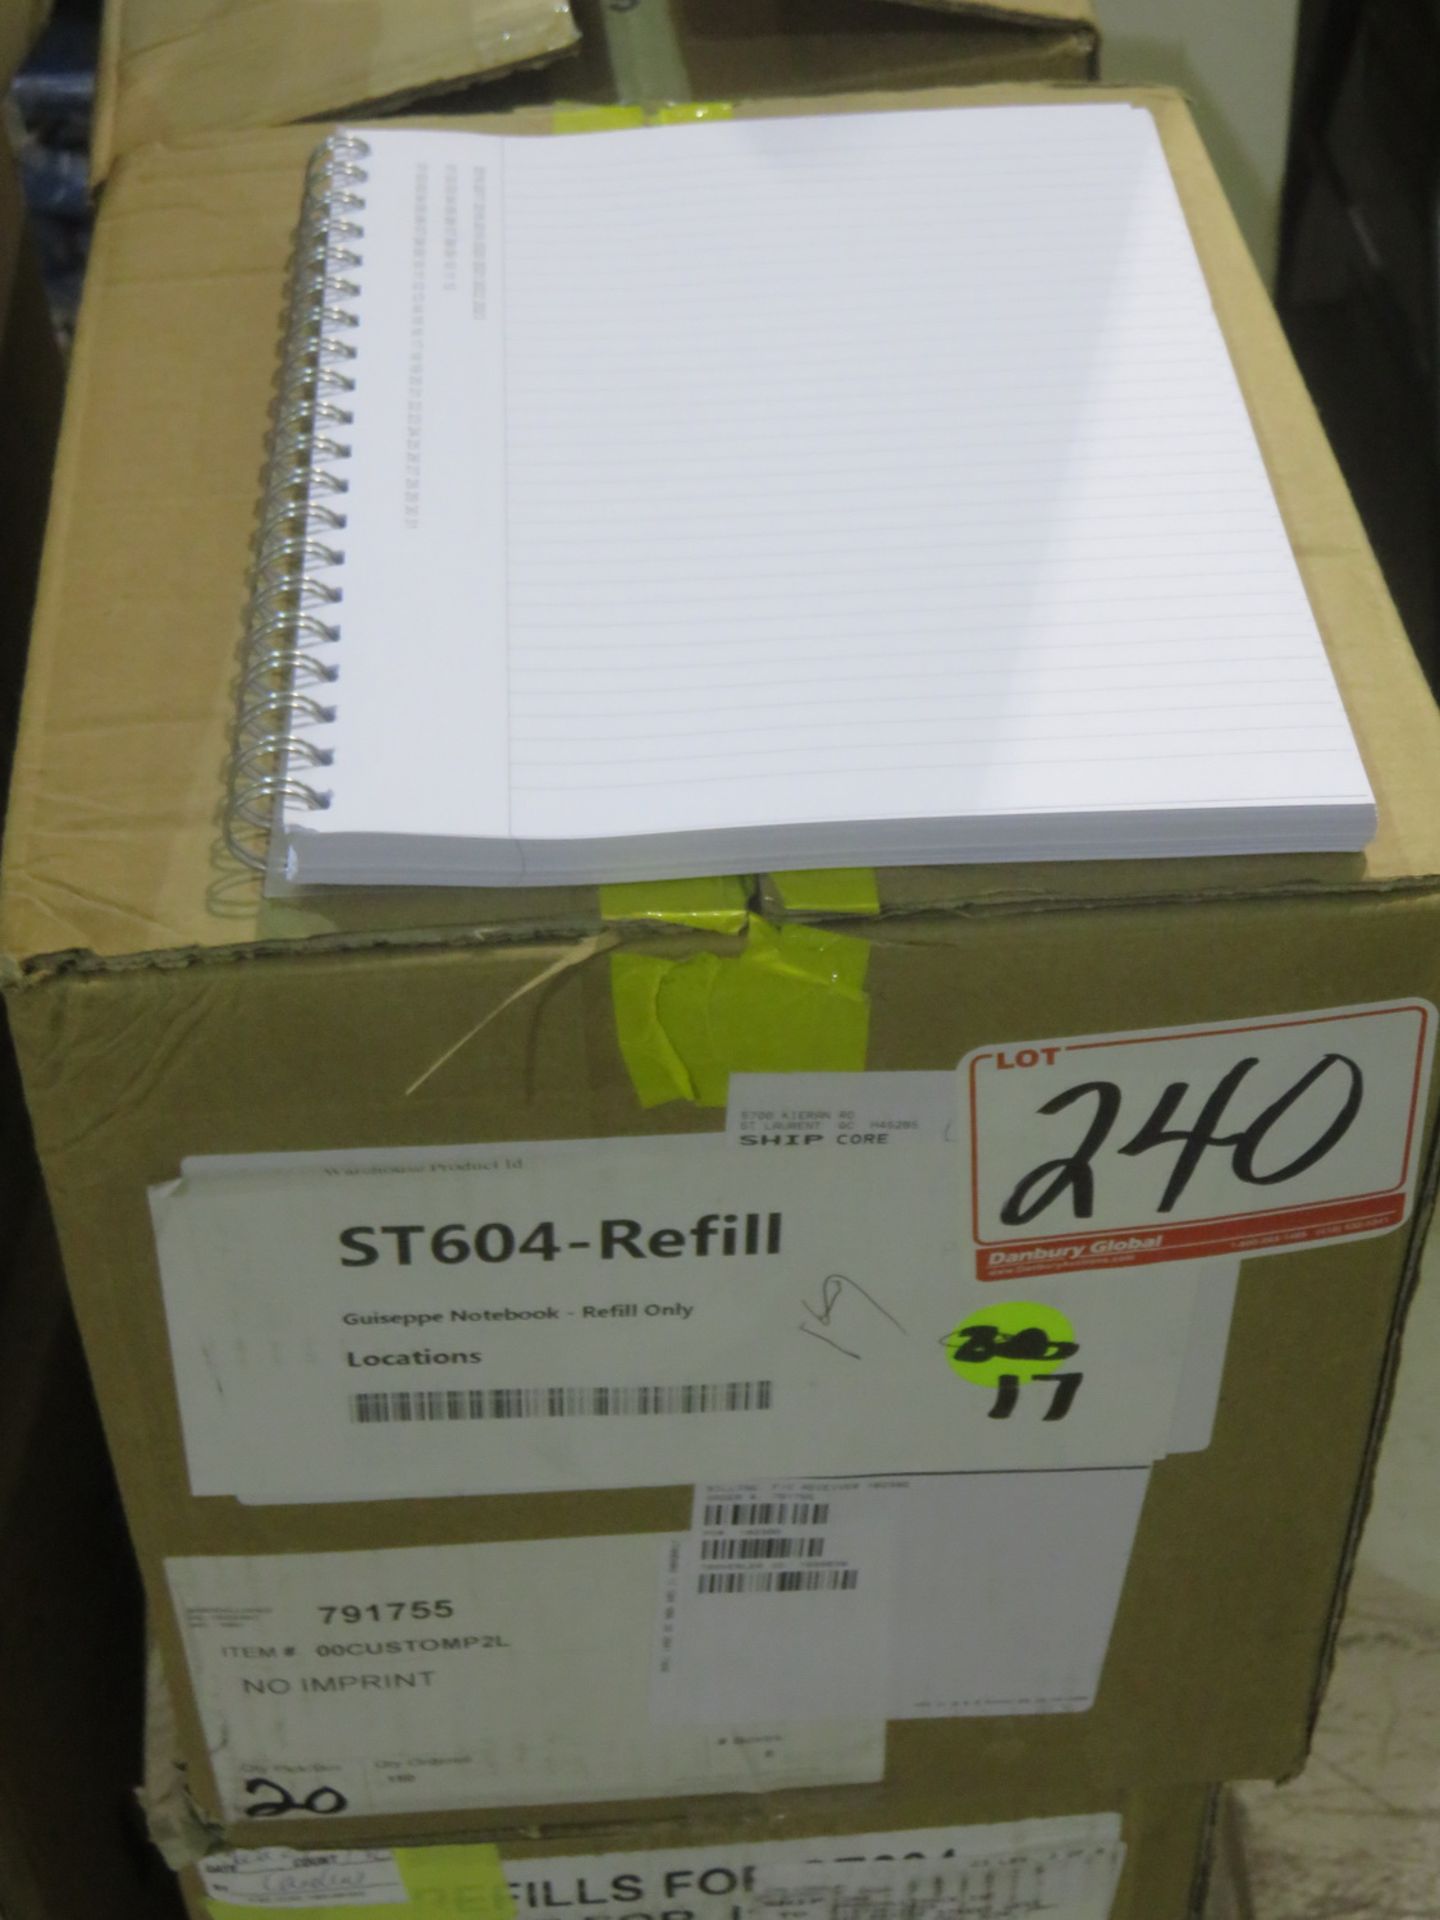 BOXES - SPECTOR ST 604-REFILL GIUSEPPIE NOTE BOOK - REFILL ONLY (5 BXS - 20 UNITS), (1 BX - 17